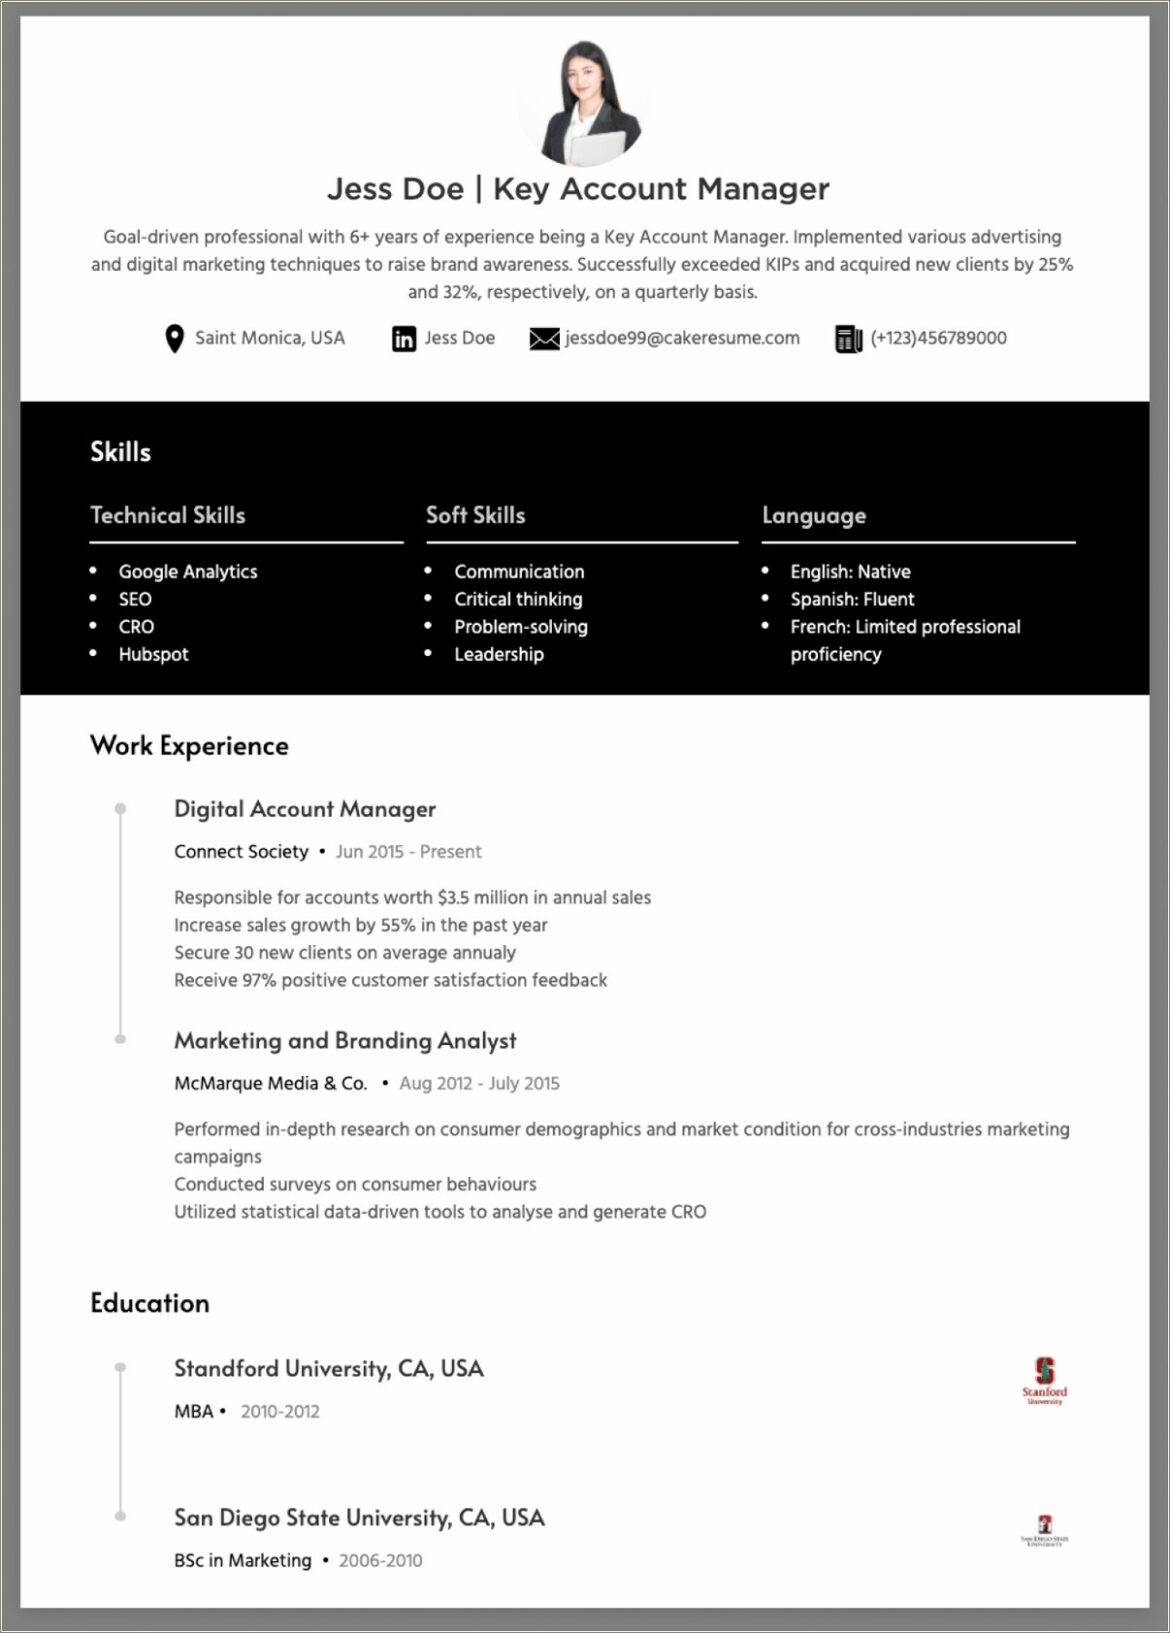 Senior Account Manager Objective On Resume